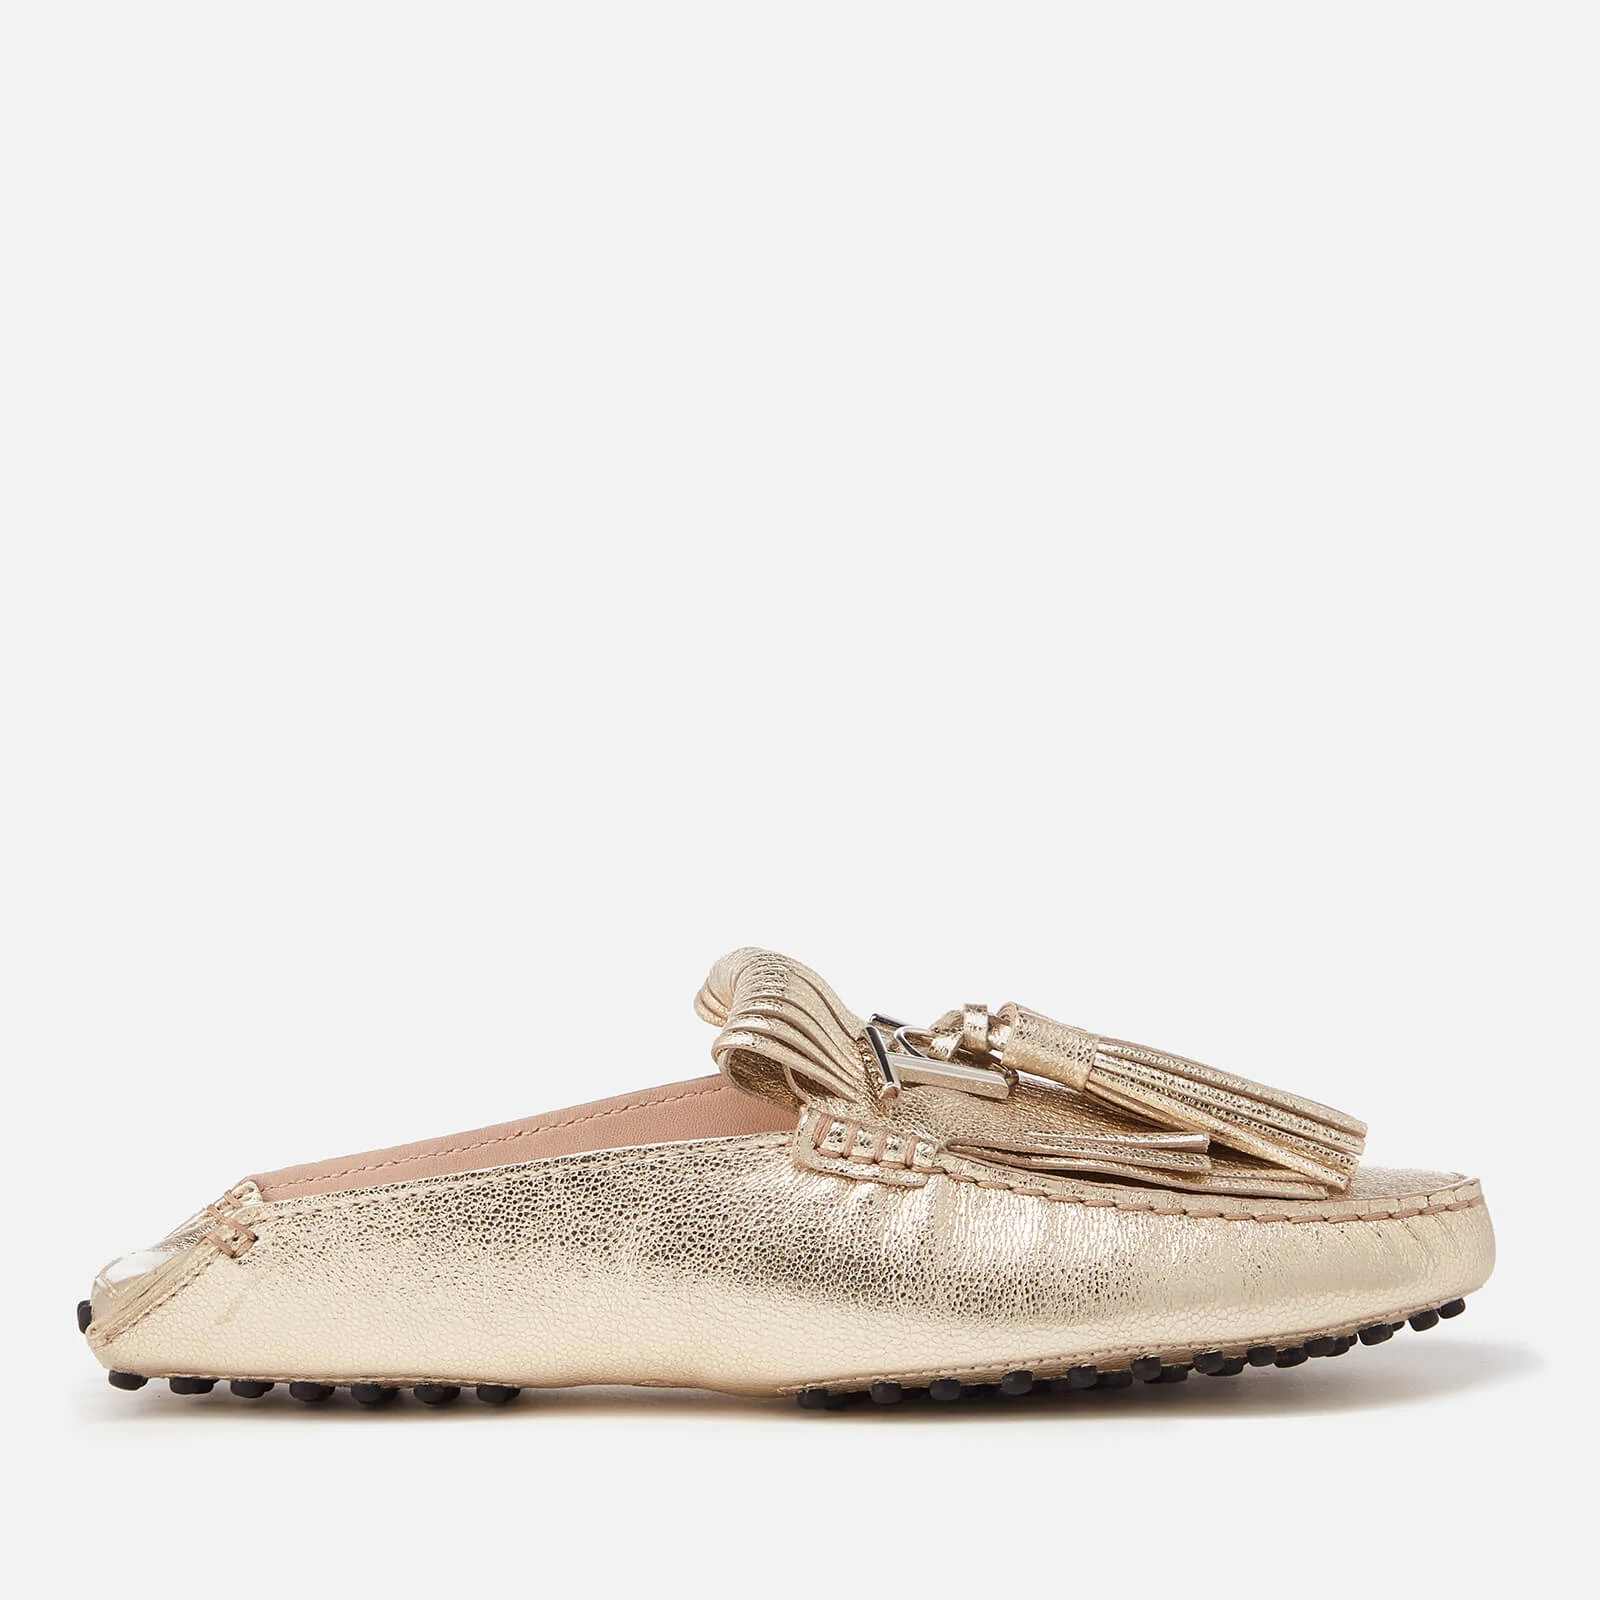 Tod's Women's Gommino Fringe Metallixc Leather Loafers - Gold Image 1